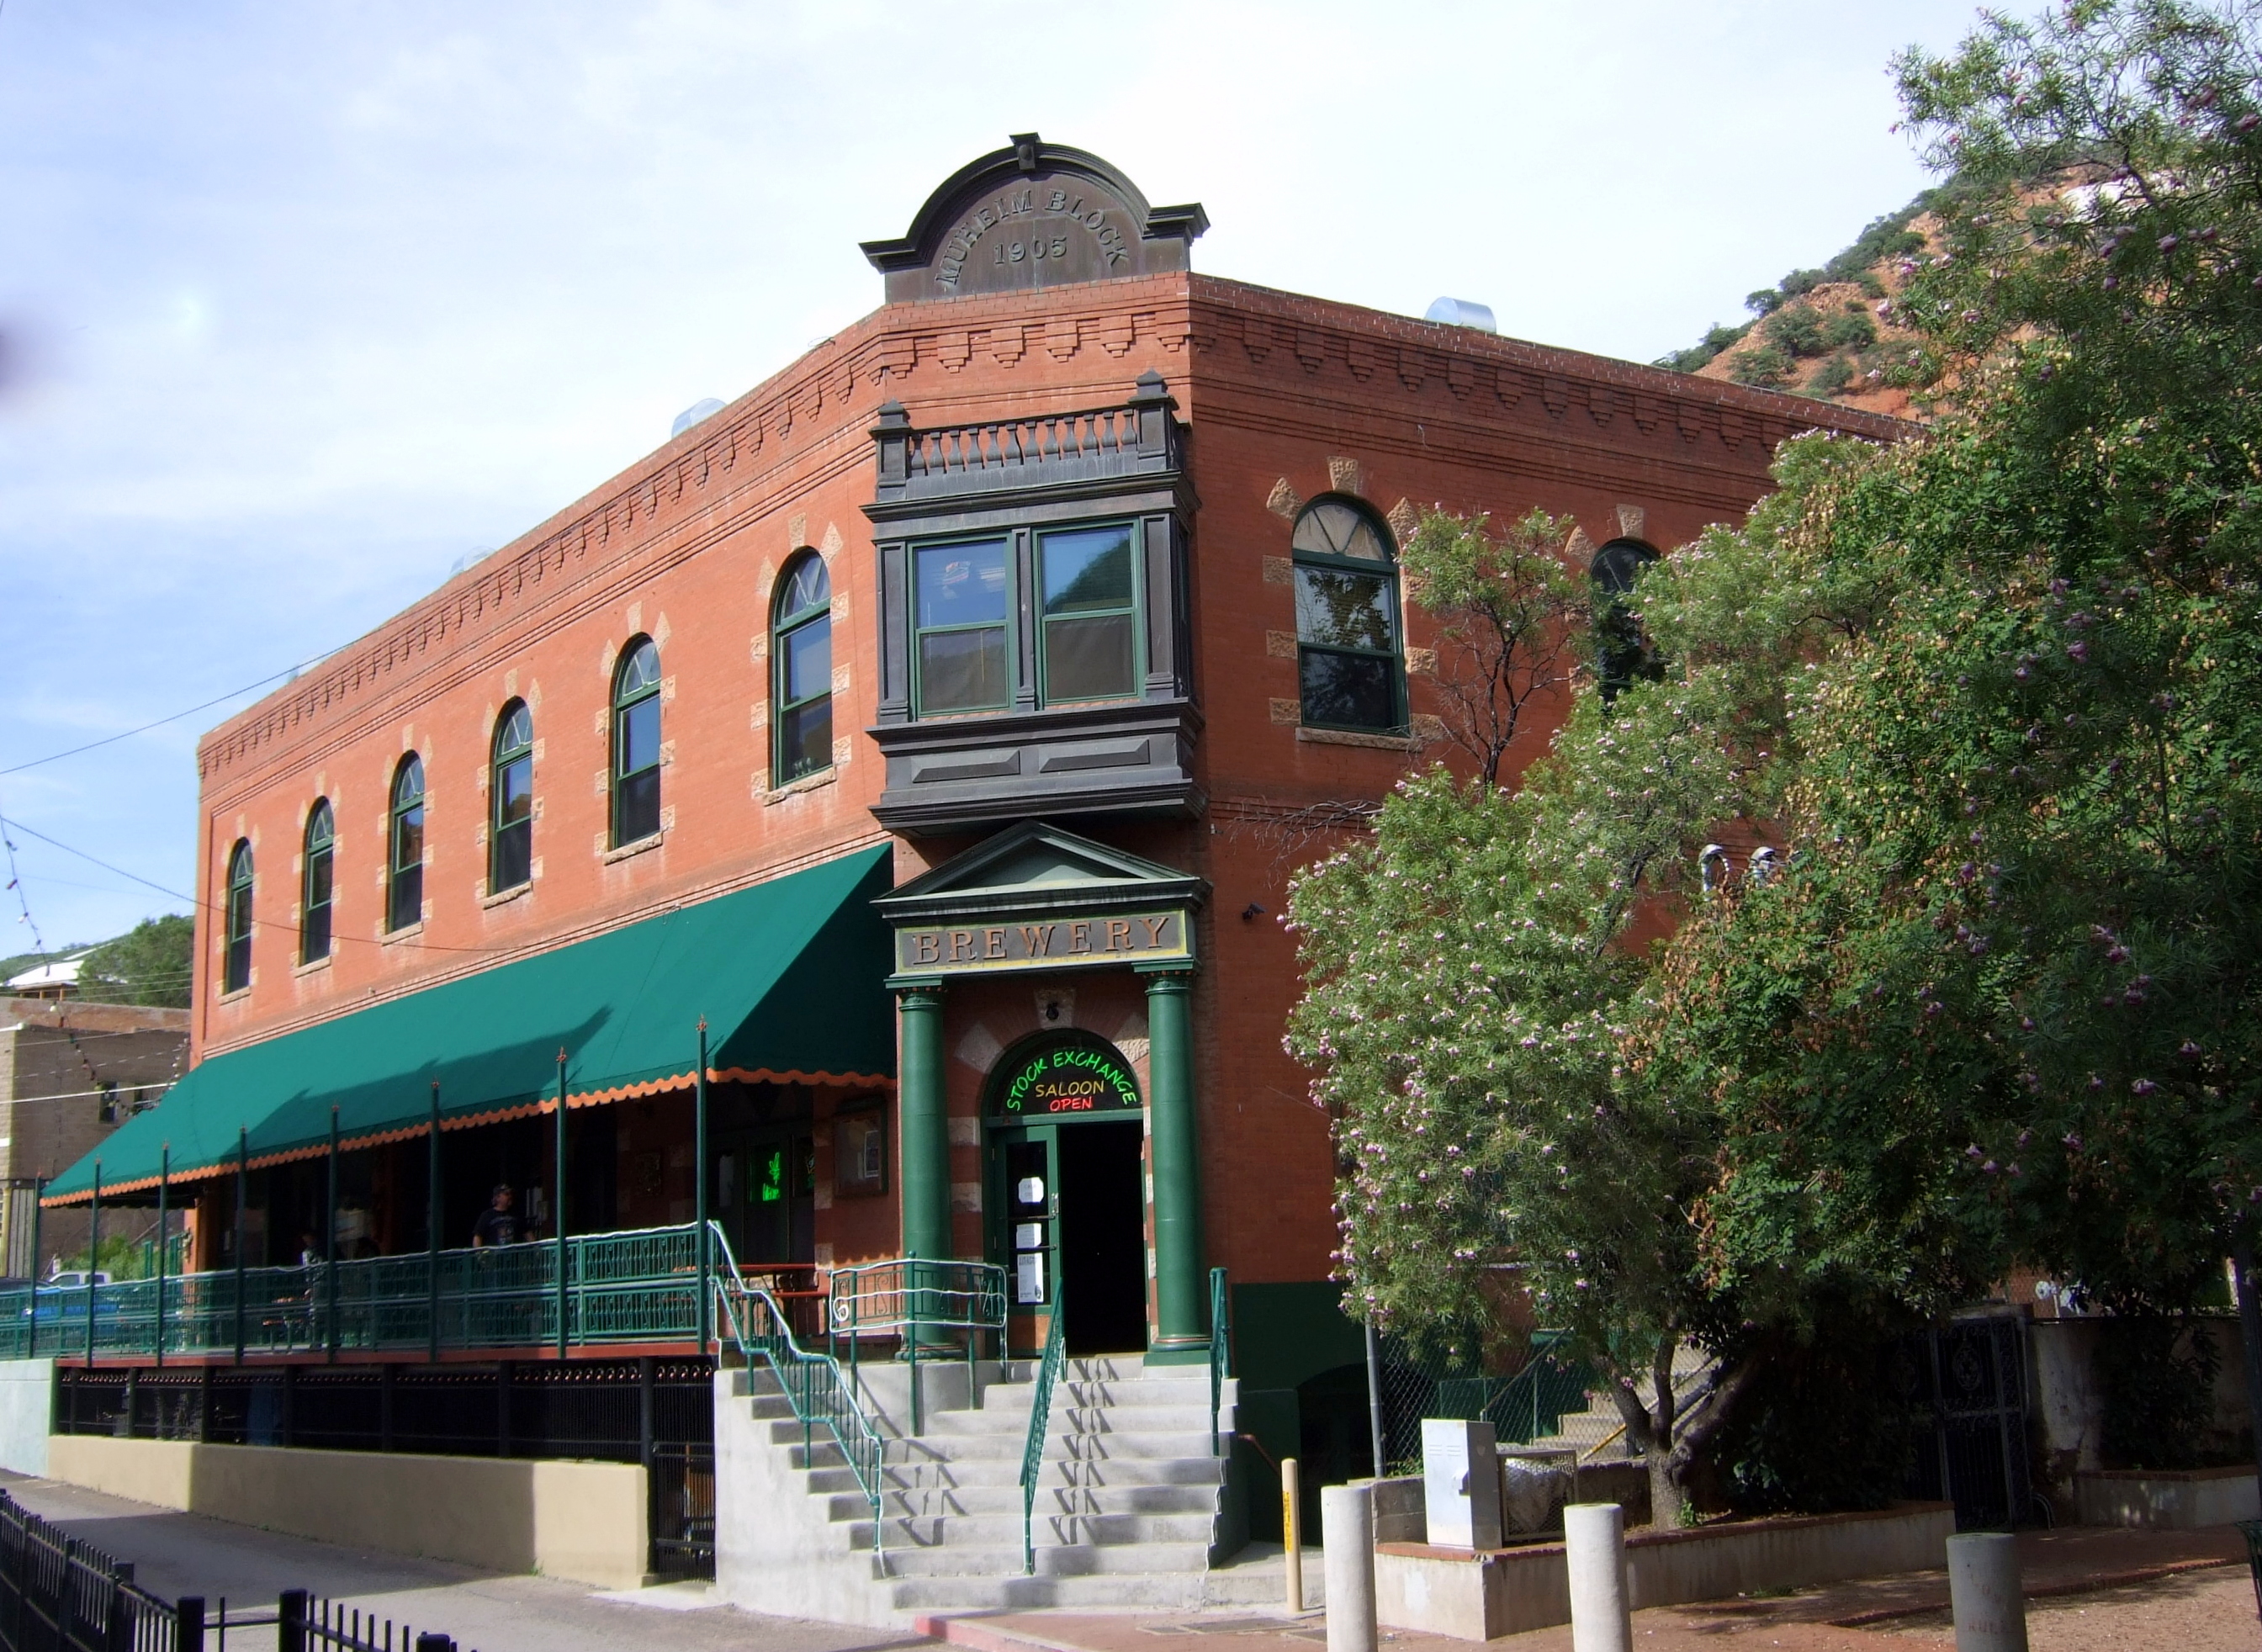 Are there any admission free attractions available in Bisbee, Arizona?